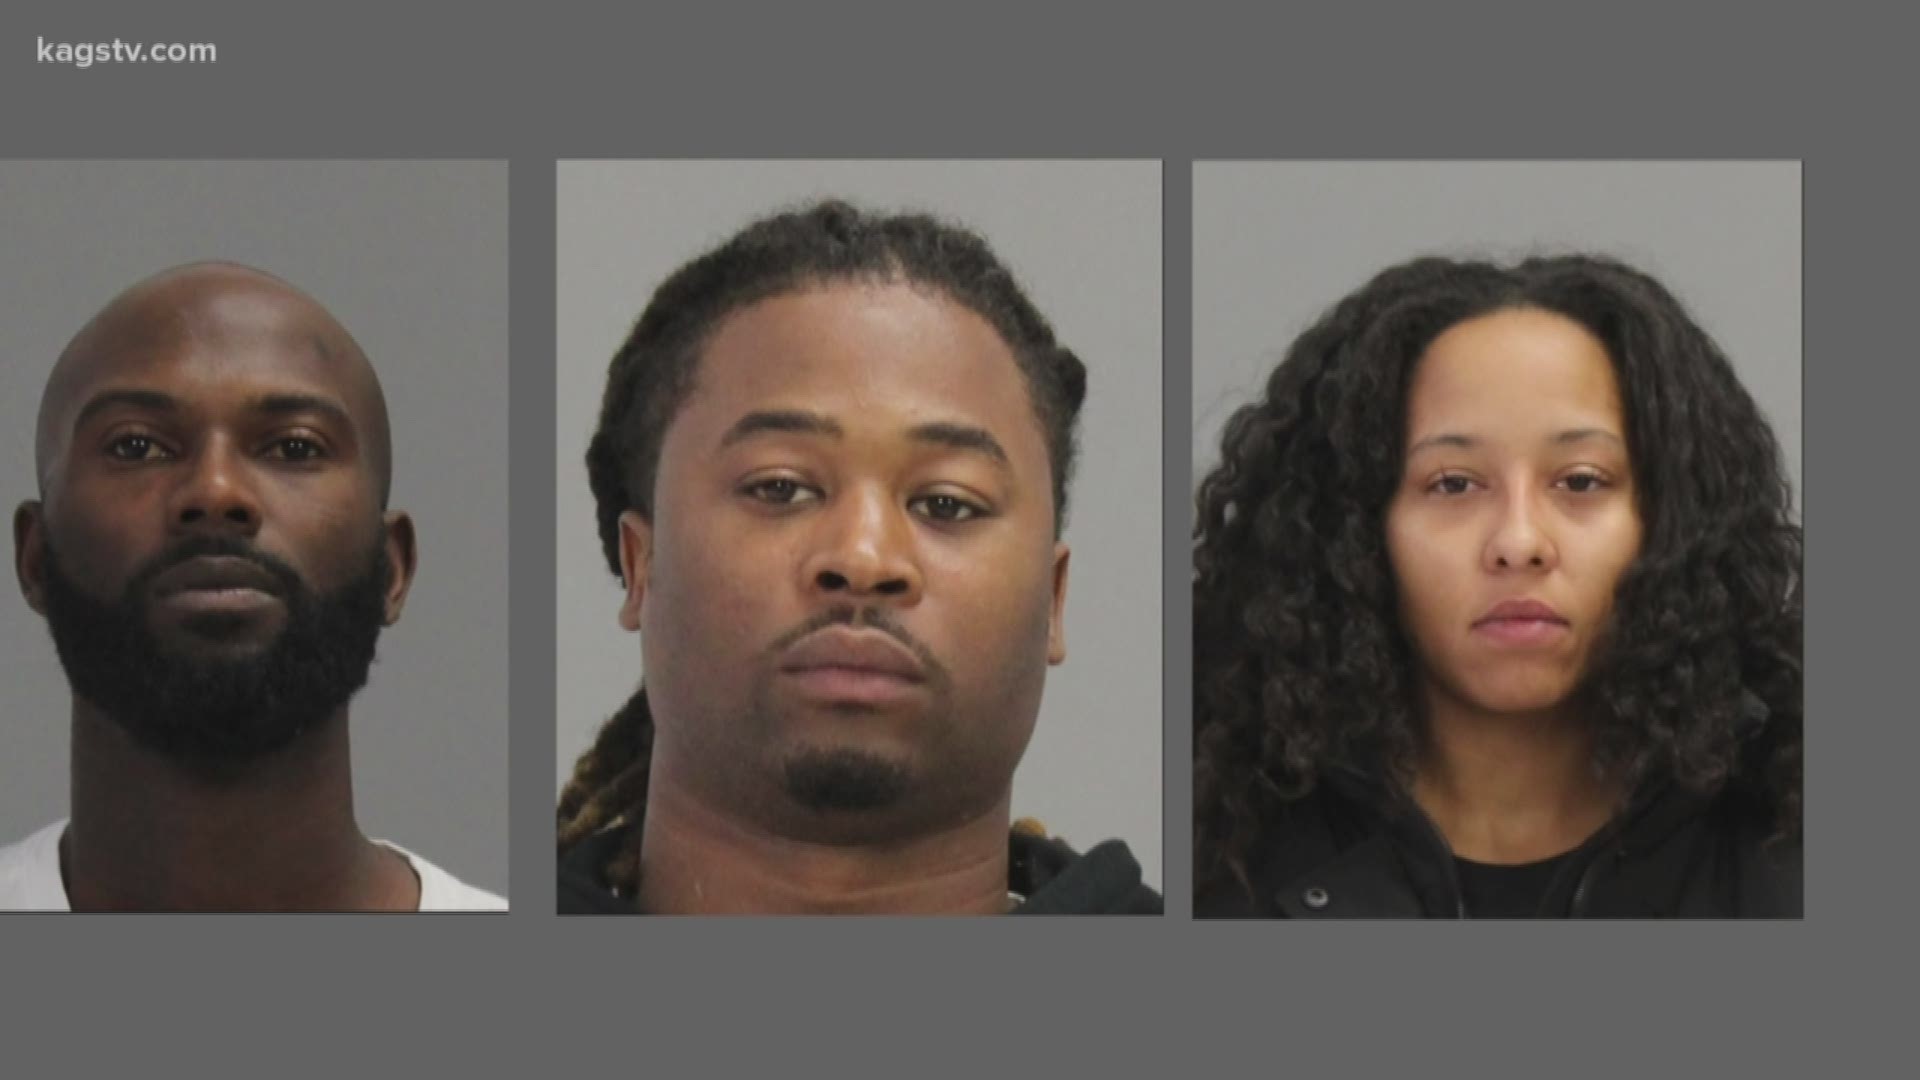 Authorities also made three arrests, found a handgun and $6,000 in jewelry at the home.